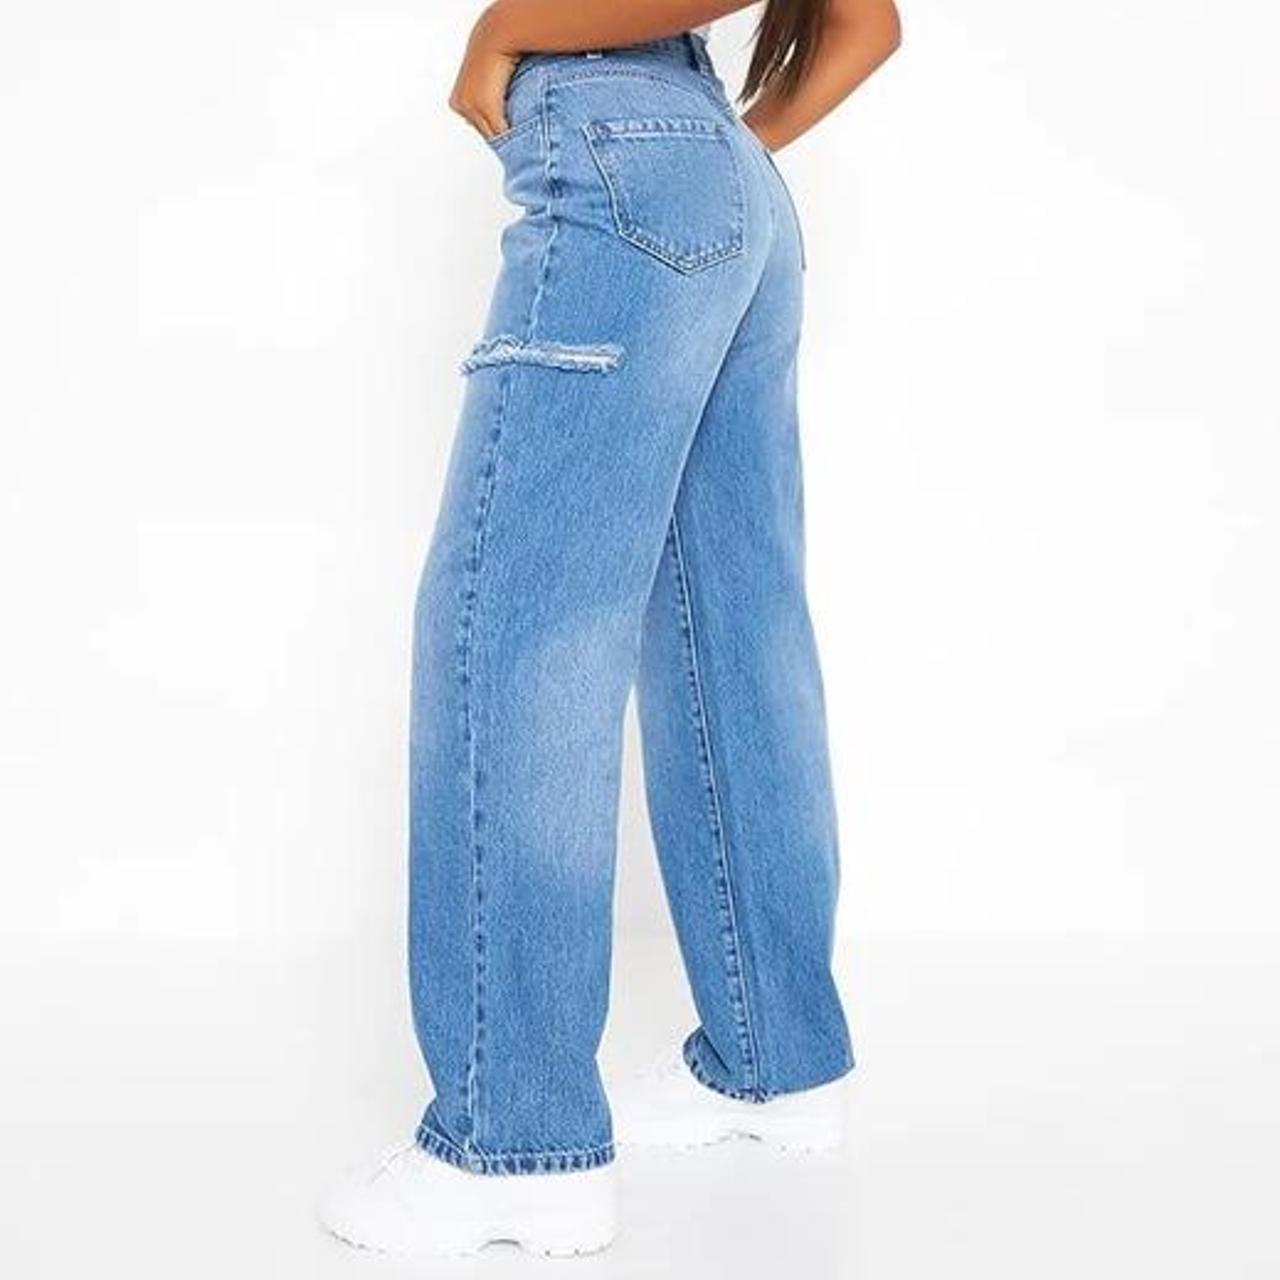 I Saw It First Women's Blue Jeans (2)